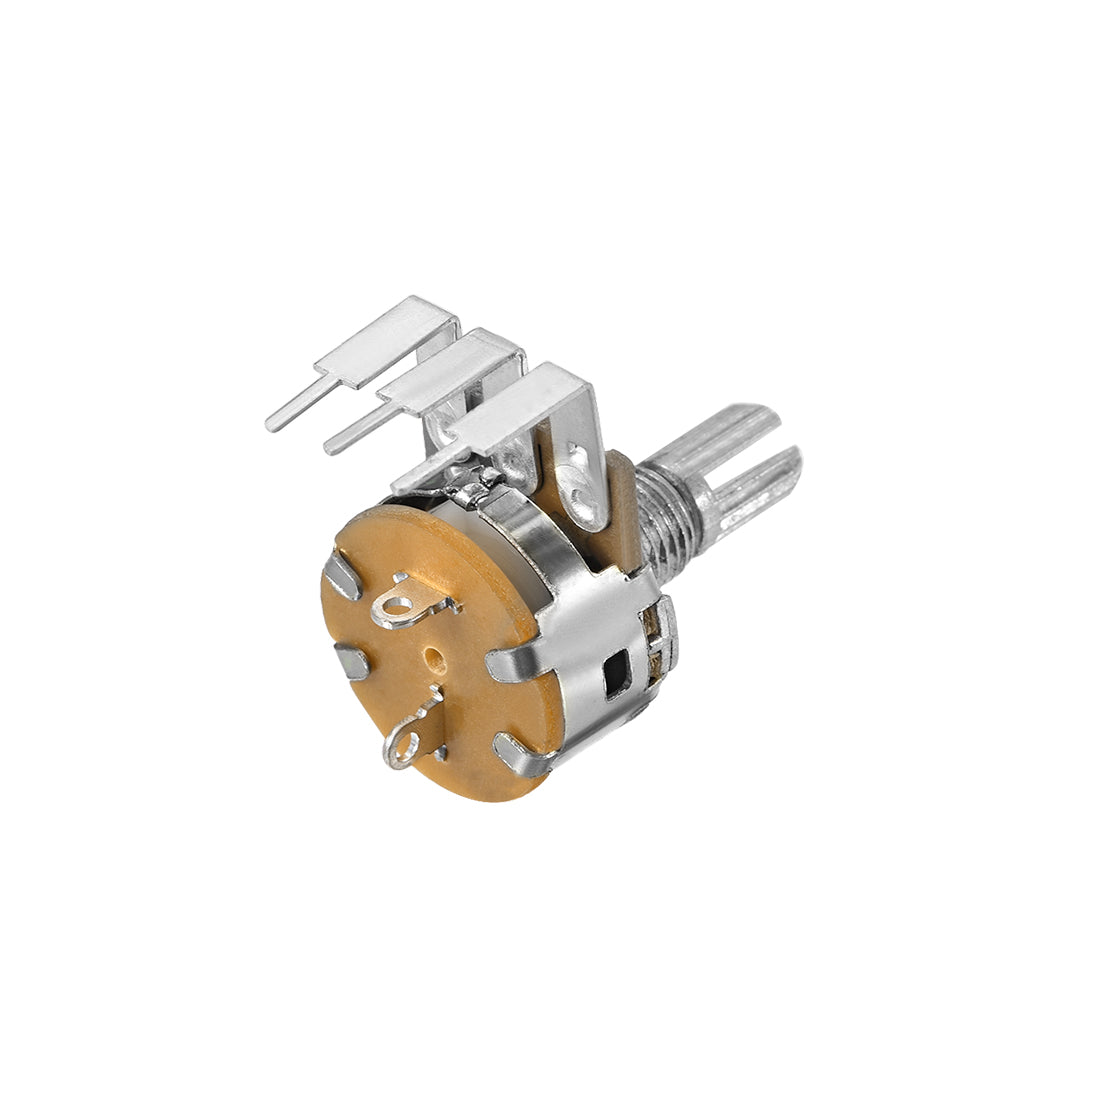 uxcell Uxcell WH148 Potentiometer with Switch 10K Ohm Variable Resistors Single Turn Rotary Carbon Film Taper 2pcs